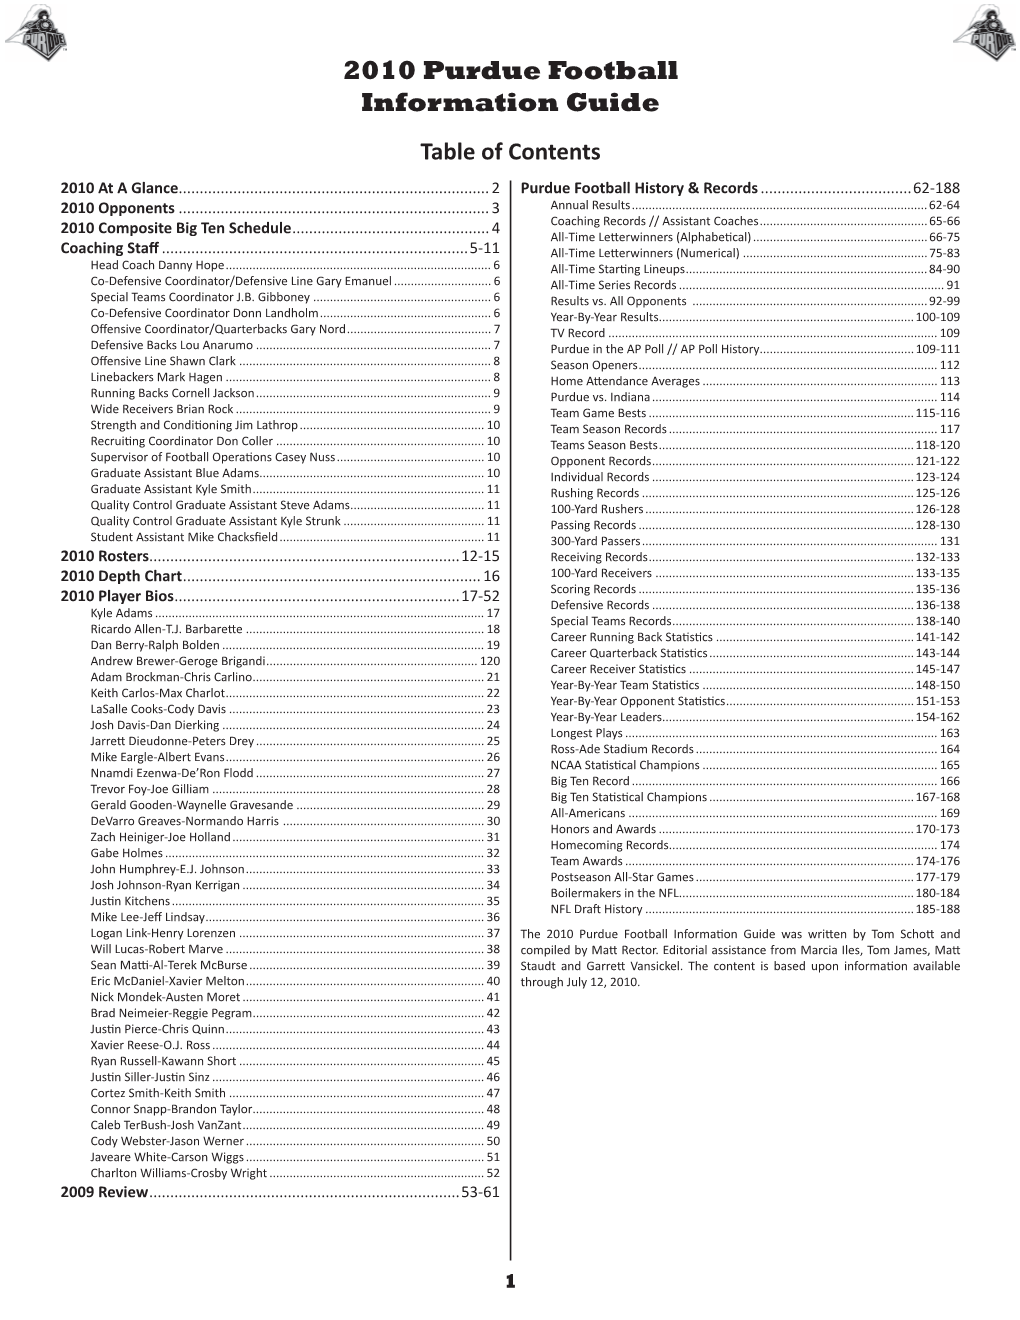 2010 Purdue Football Information Guide Table of Contents 2010 at a Glance